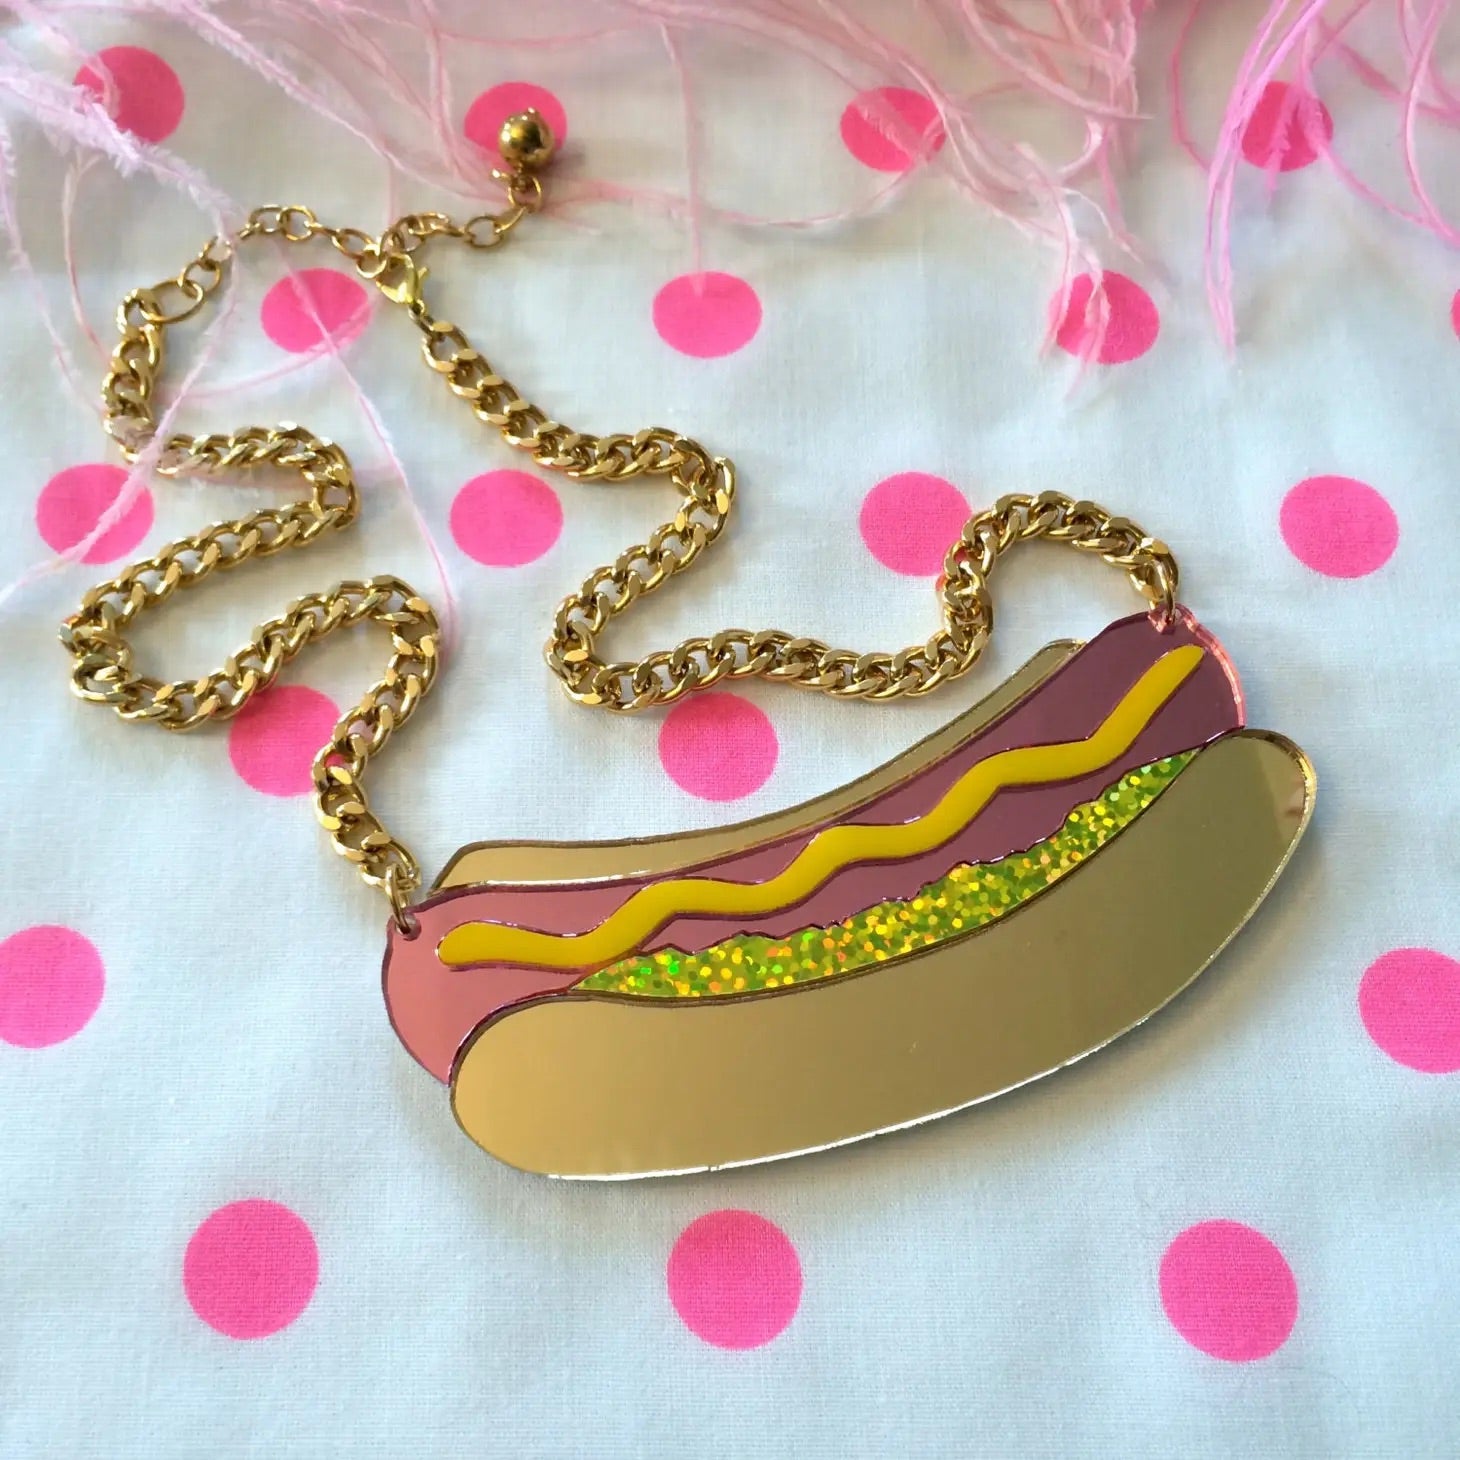 Necklace with large hot dog shaped charm made  of laser-cut layered mirrored acrylic pink hot dog and brown bun with squiggly yellow mustard and green glitter foil relish on a gold metal linked chain